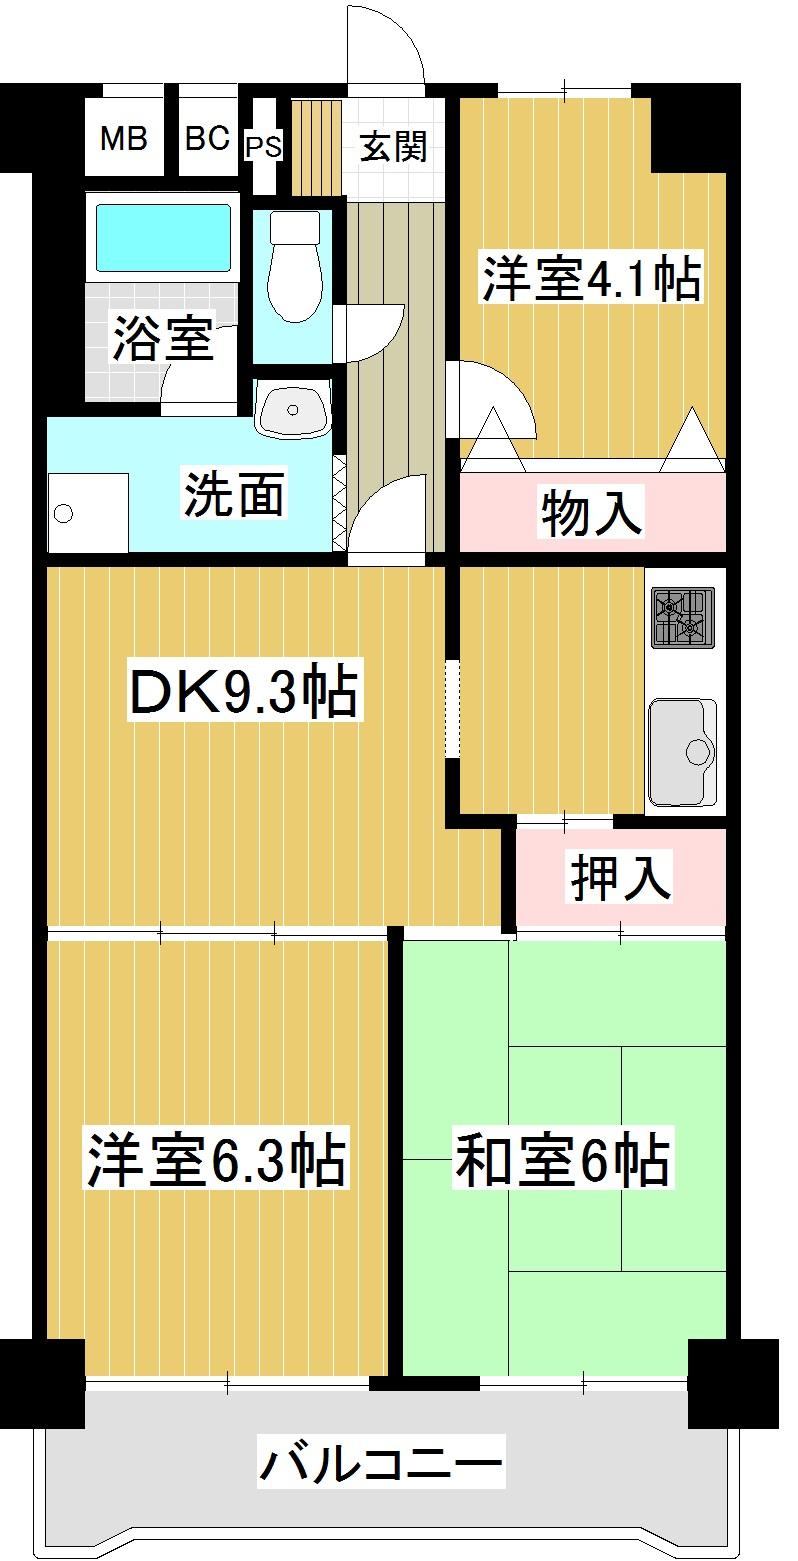 Floor plan. 3DK, Price 12.8 million yen, The best also for the occupied area 59.08 sq m family